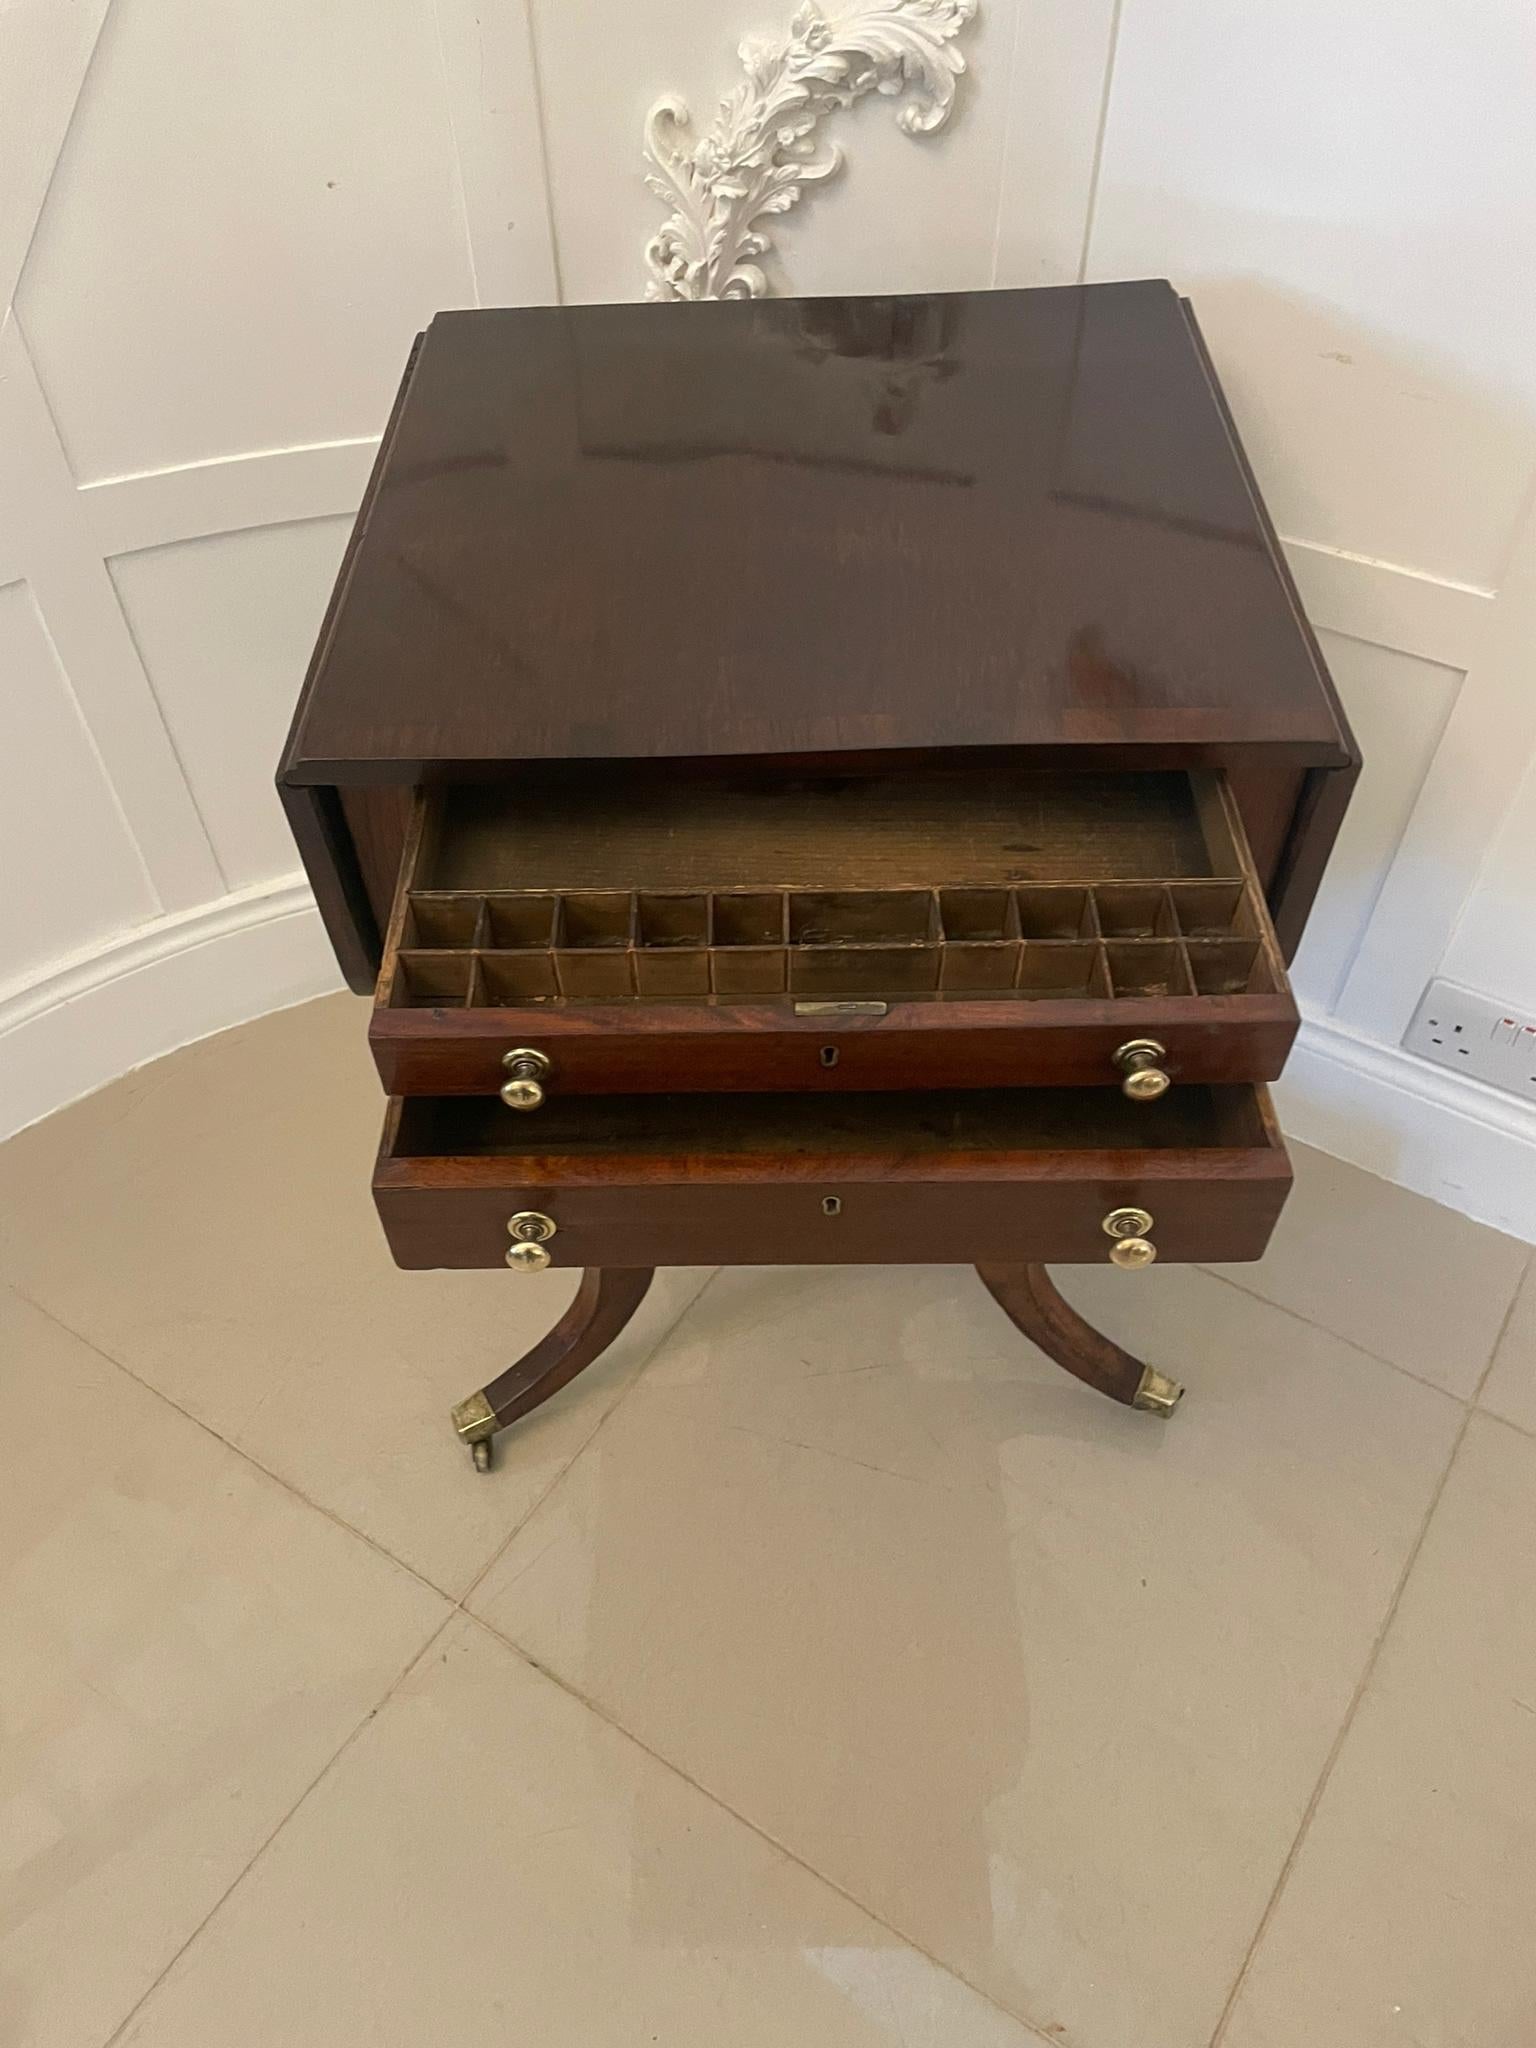 Superb Quality Antique Regency Freestanding Mahogany Sewing/Side Table In Good Condition For Sale In Suffolk, GB